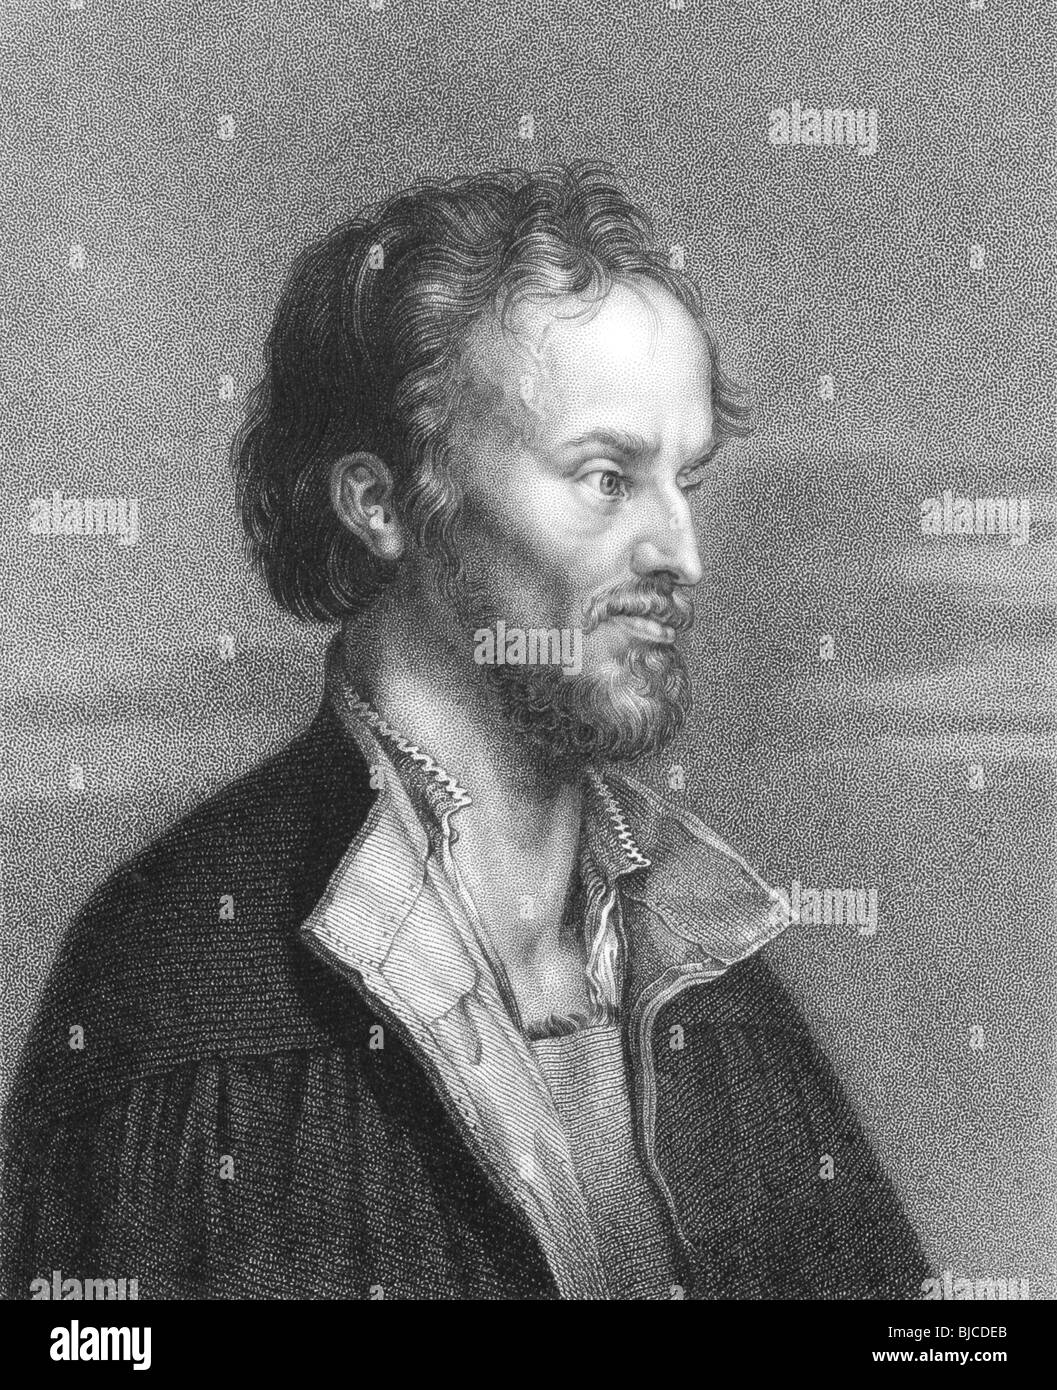 Philipp Melanchthon (1497-1560) on engraving from the 1800s. Stock Photo